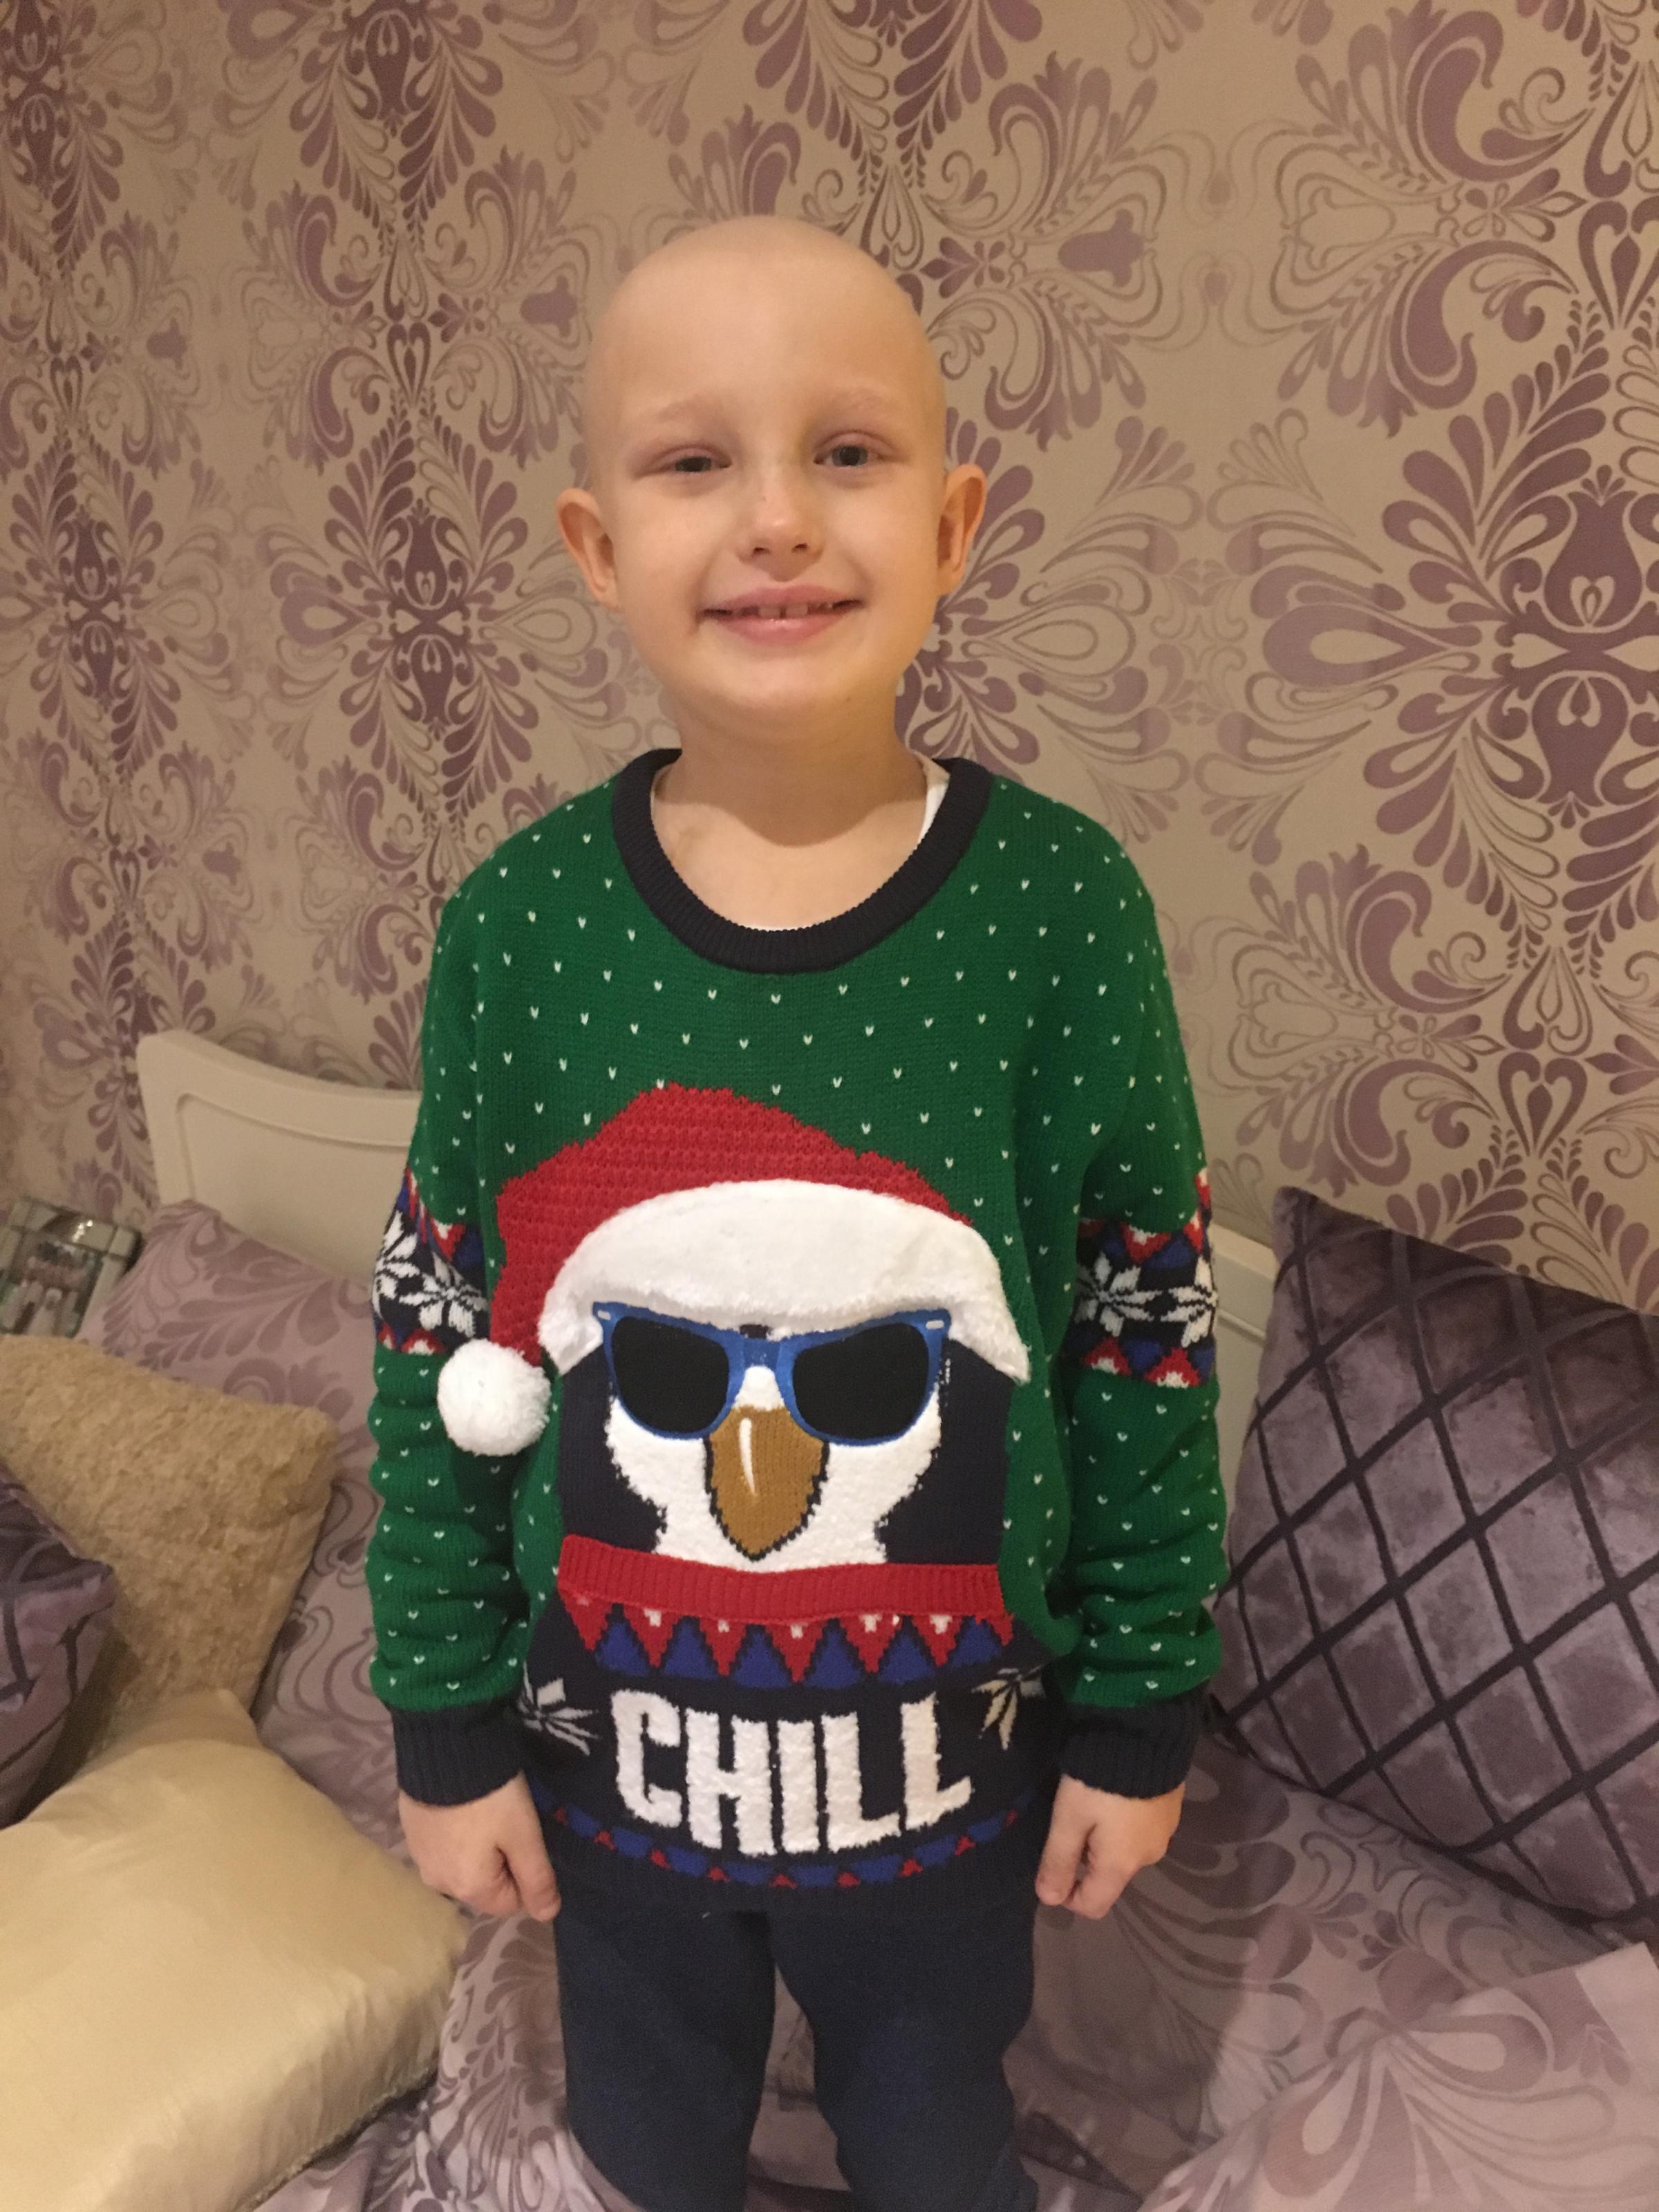 Jumpers for Jenson campaign wants your Christmas knitwear selfies